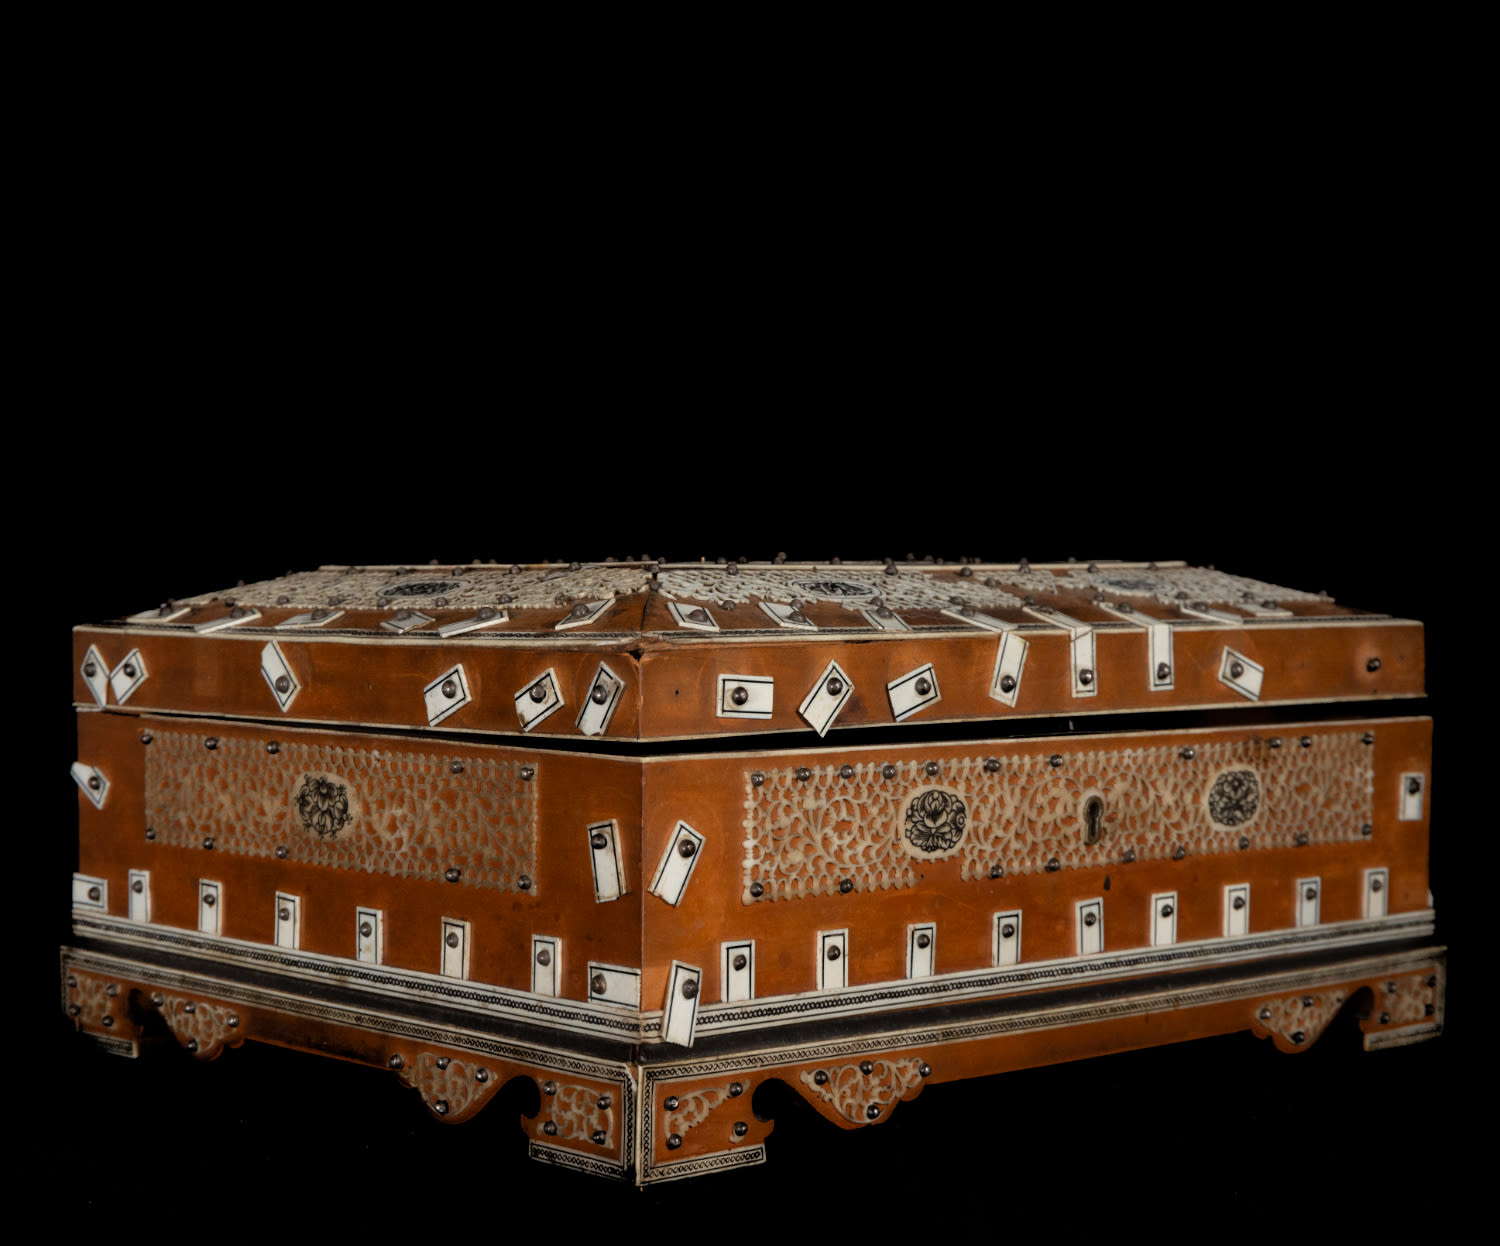 Indian tabletop chest in wood and carved bone marquetry with floral motifs, 19th century - Image 4 of 6